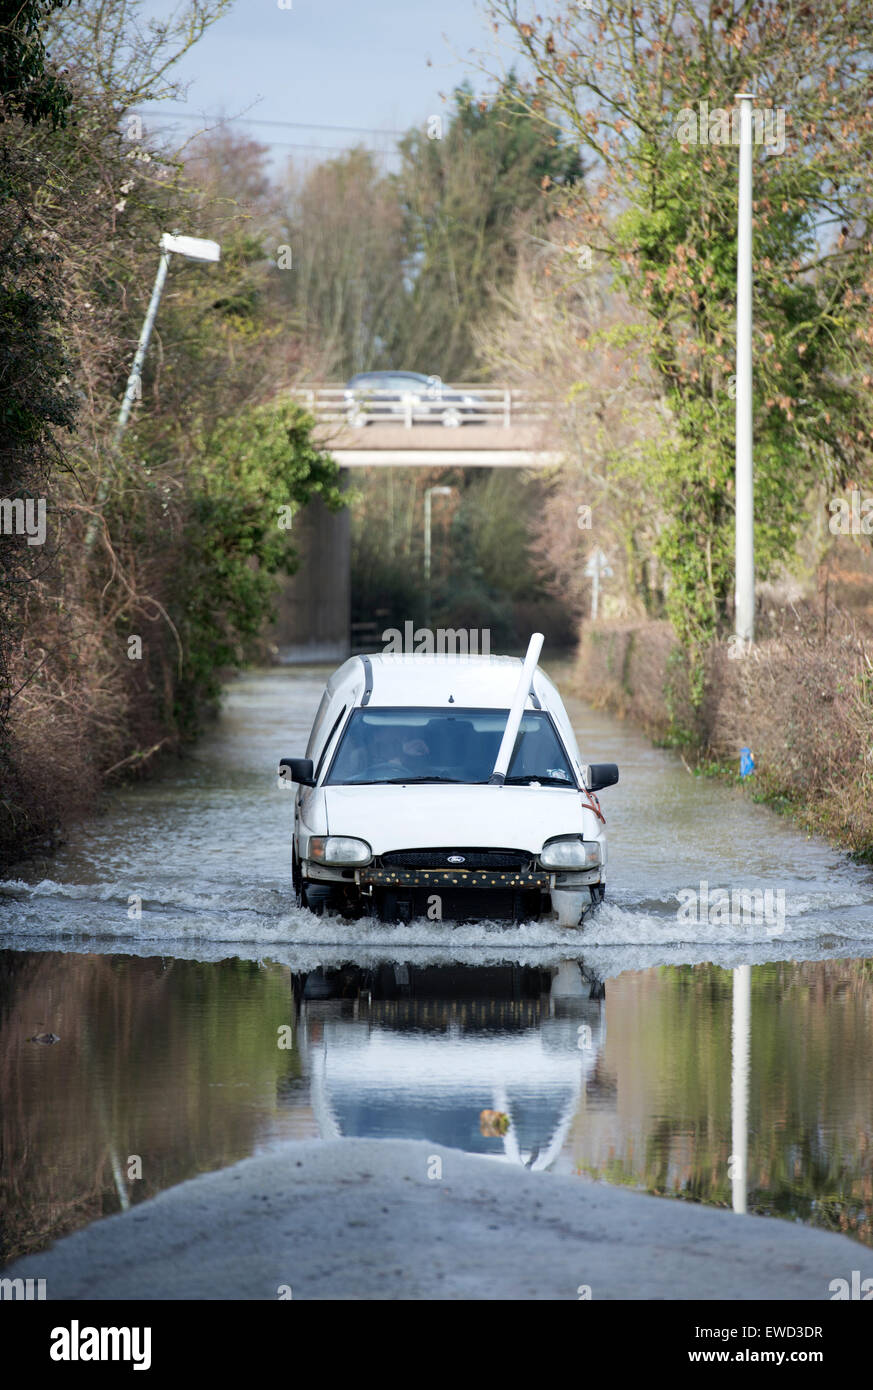 A van with an improvised snorkell tackles floodwater on Sandhurst Road, Gloucester Feb 2014 Stock Photo